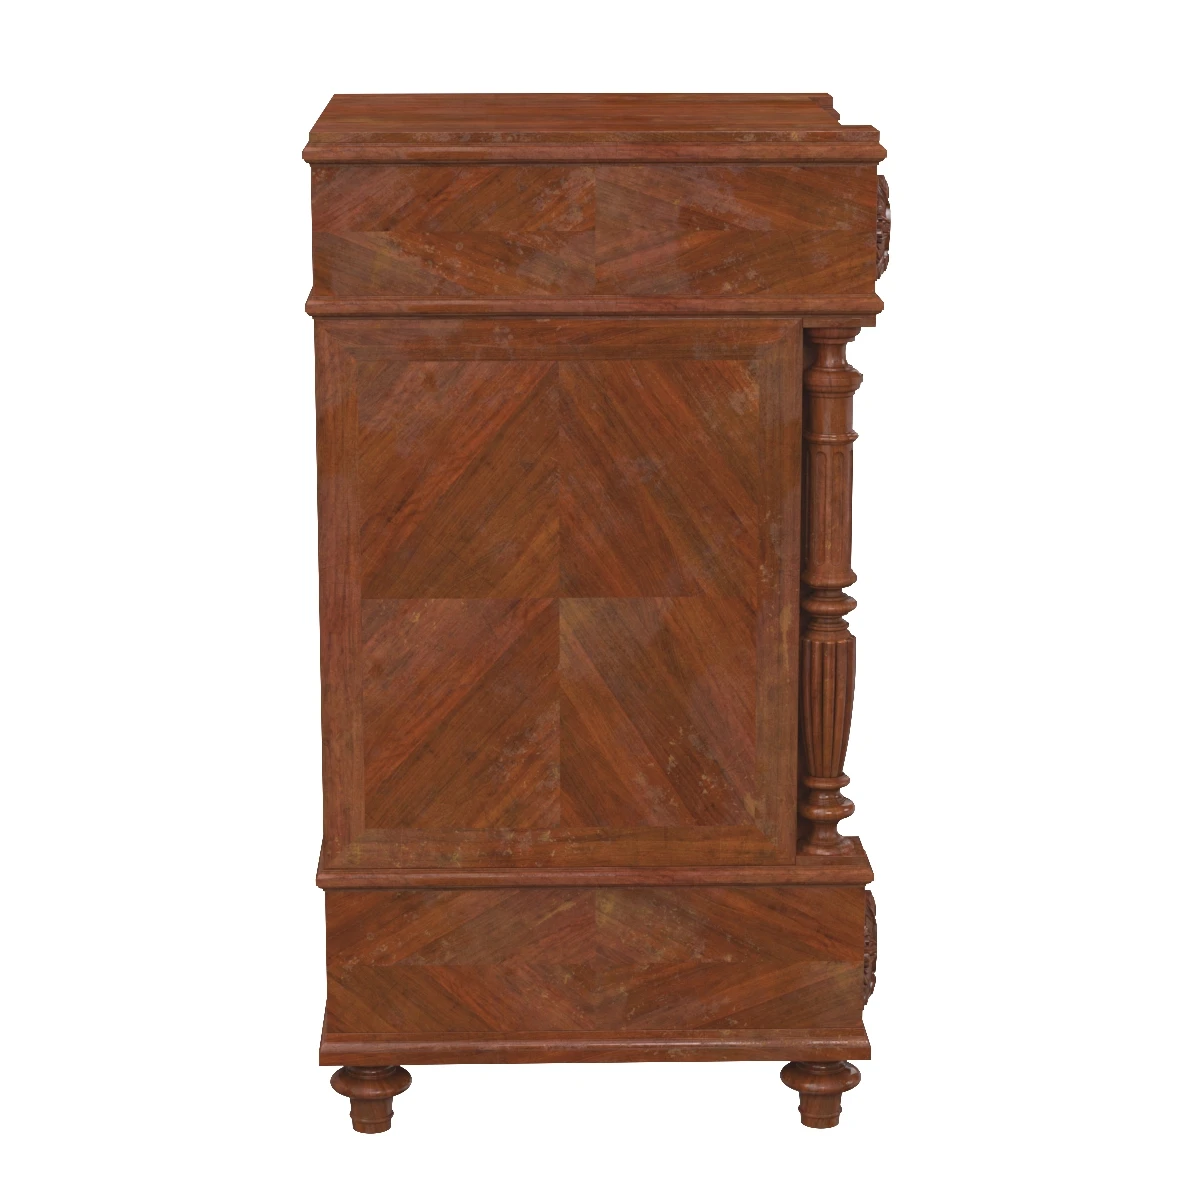 Antique French Walnut Nightstand Bedside Table 3D Model_04